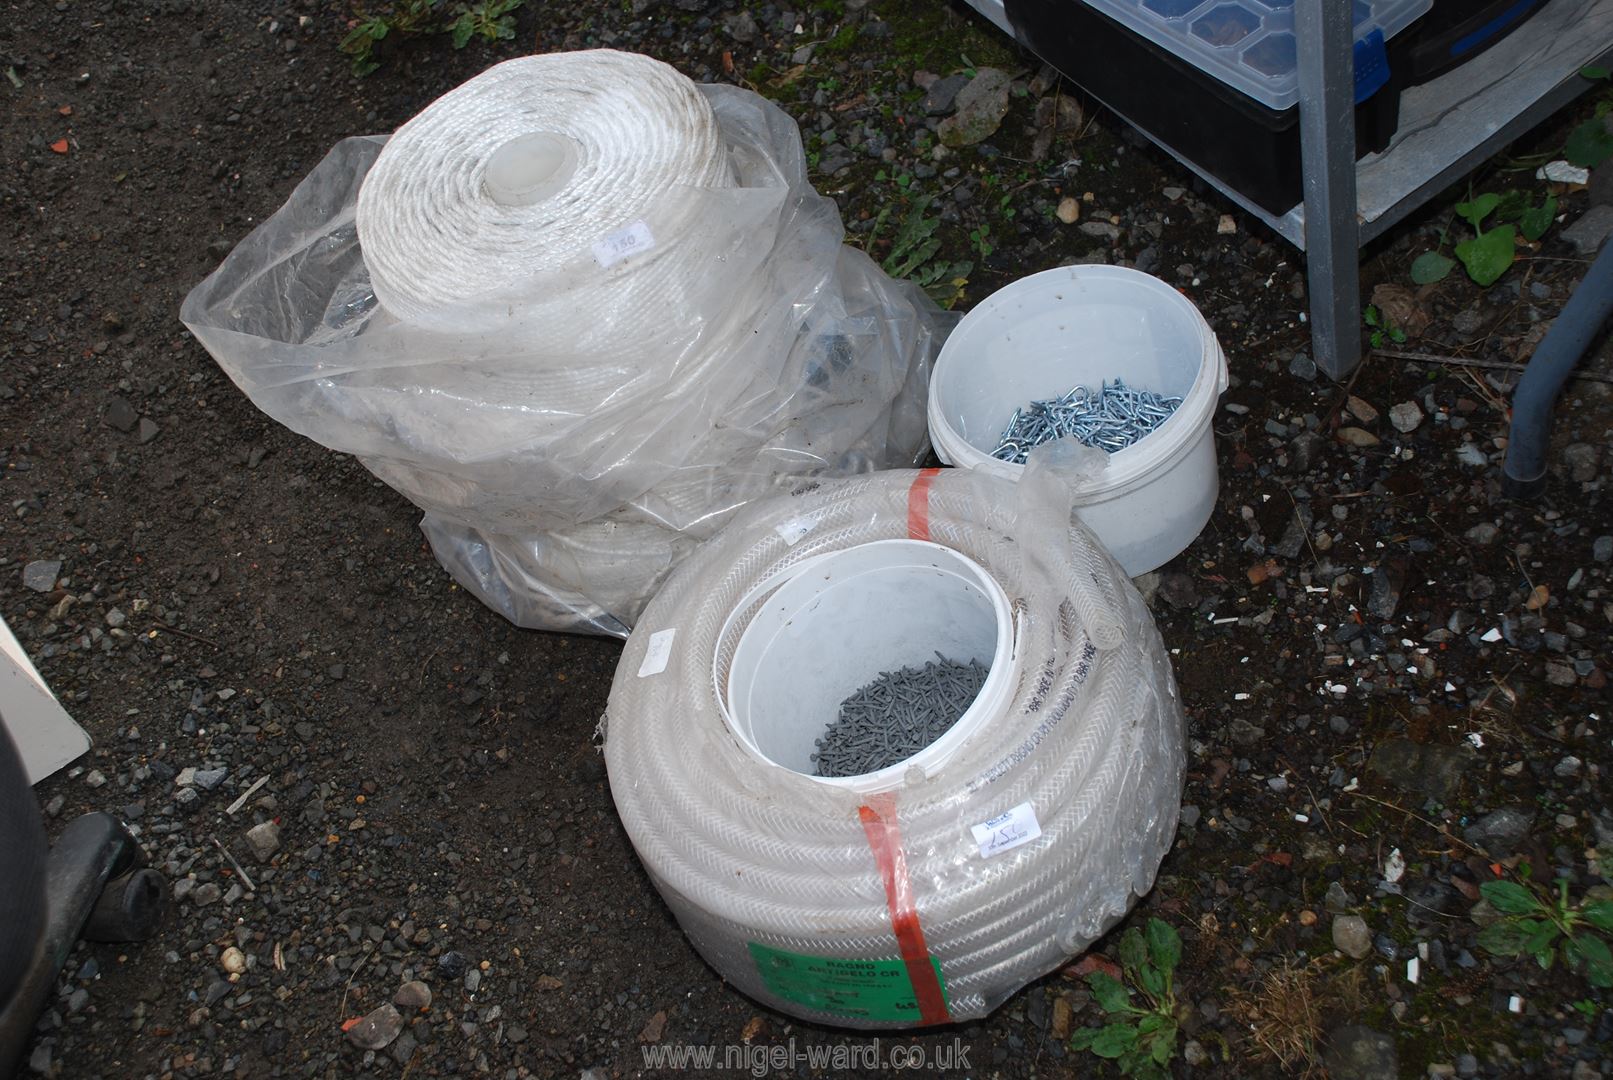 Nylon cord, roll of plastic pipe "Ragno Antigelo", plus two tubs of nails and staples.